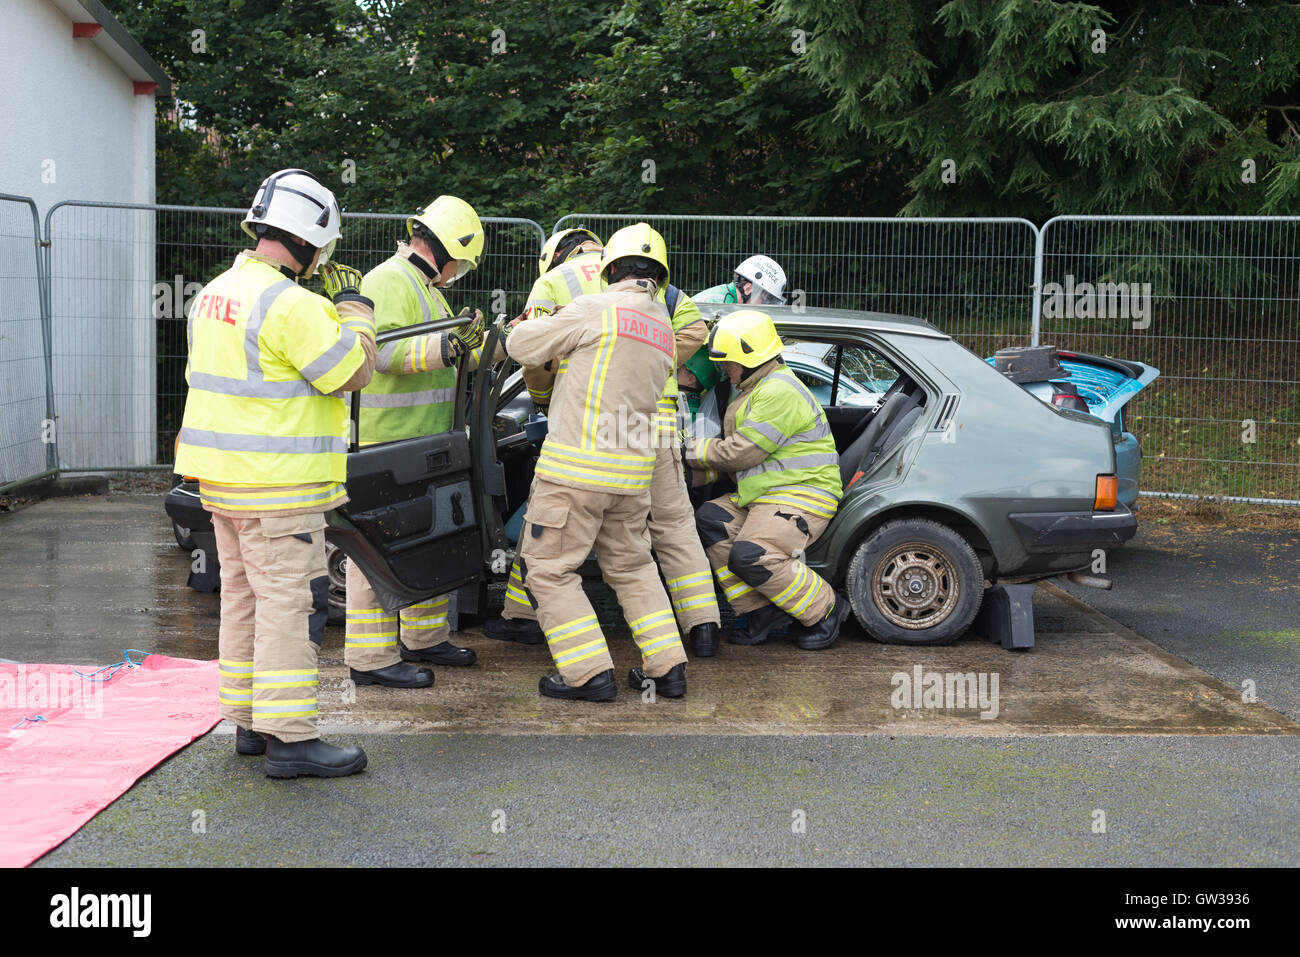 Fire men simulate a car crash rescue by cutting the doors off the car. Stock Photo